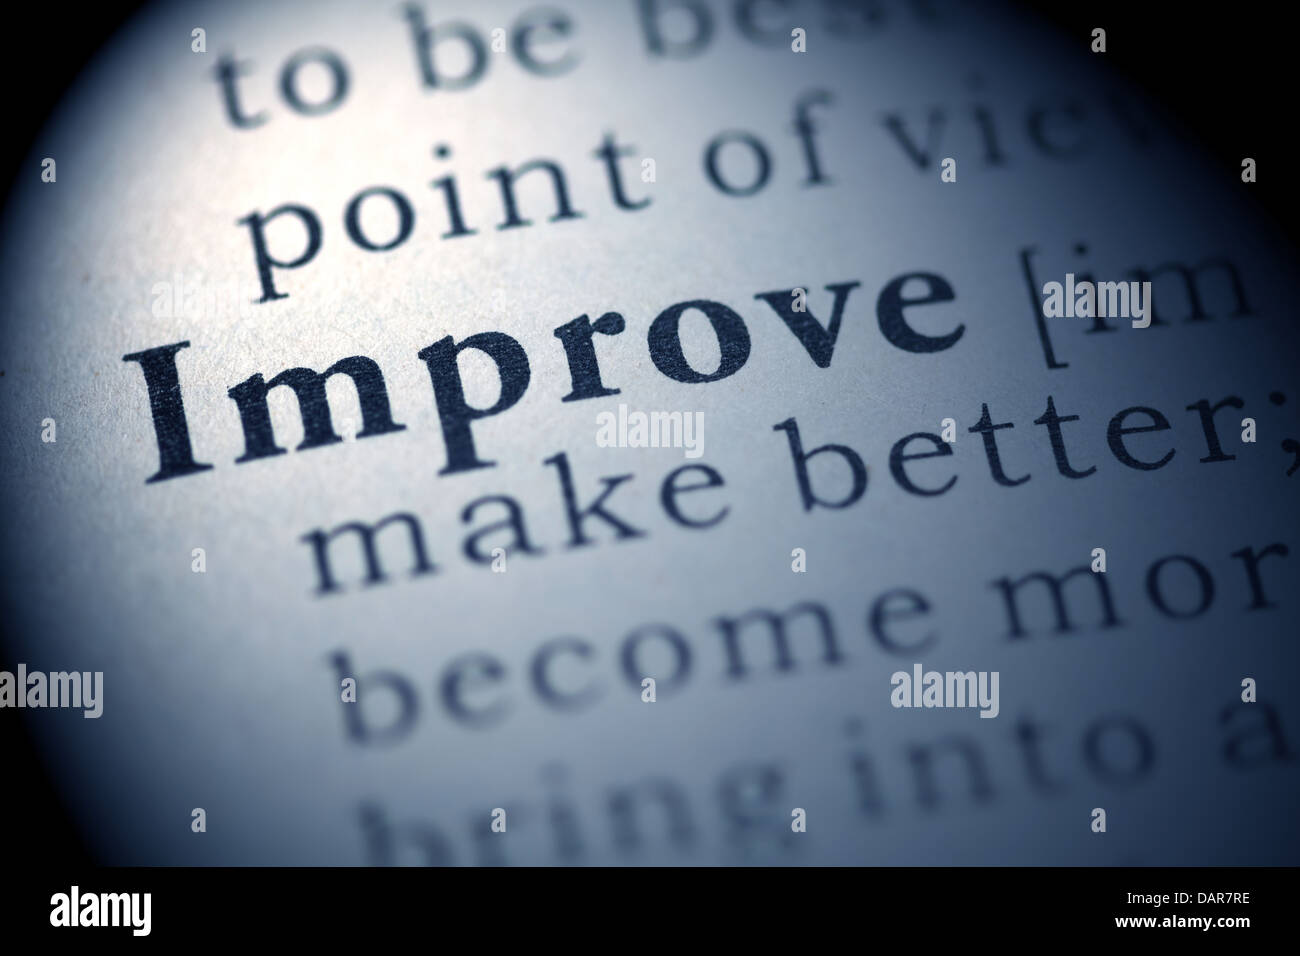 Fake Dictionary, Dictionary definition of the word Improve. Stock Photo